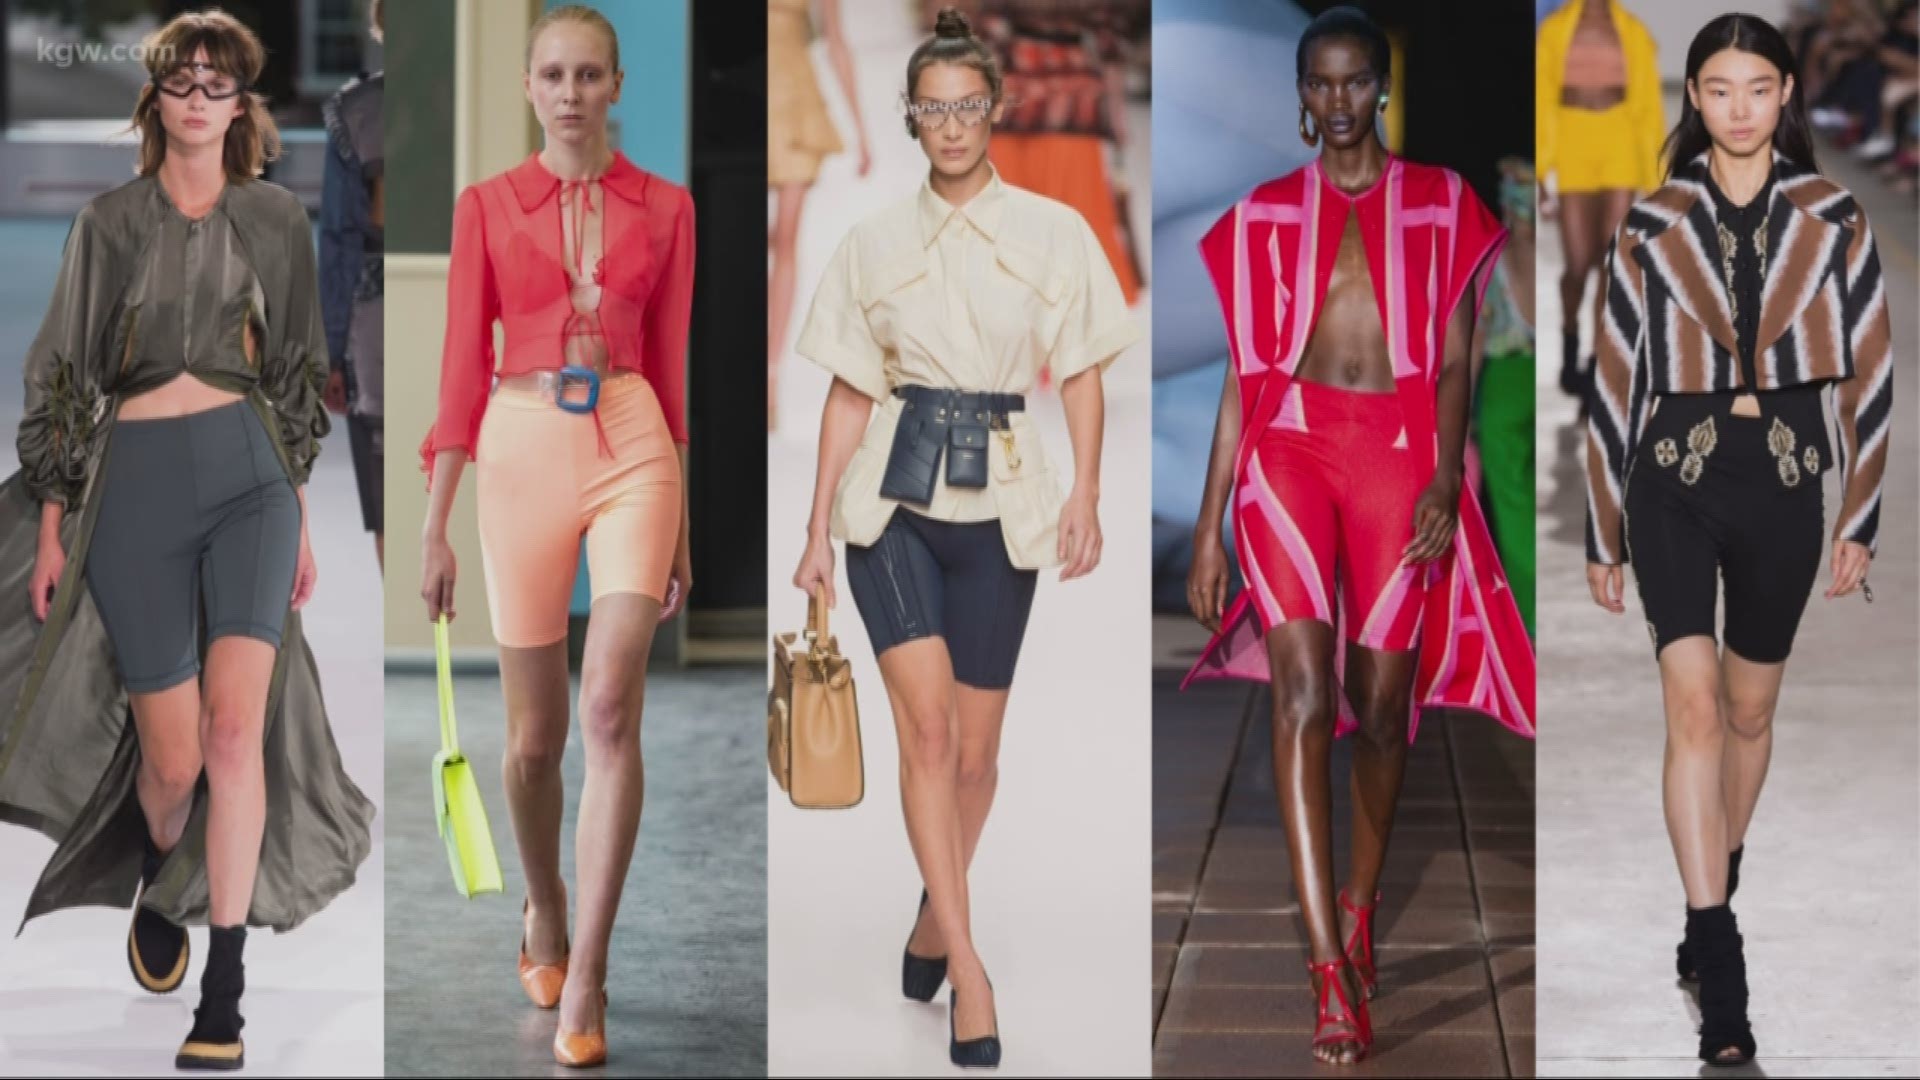 Tracking Trends: Fashion in 2019